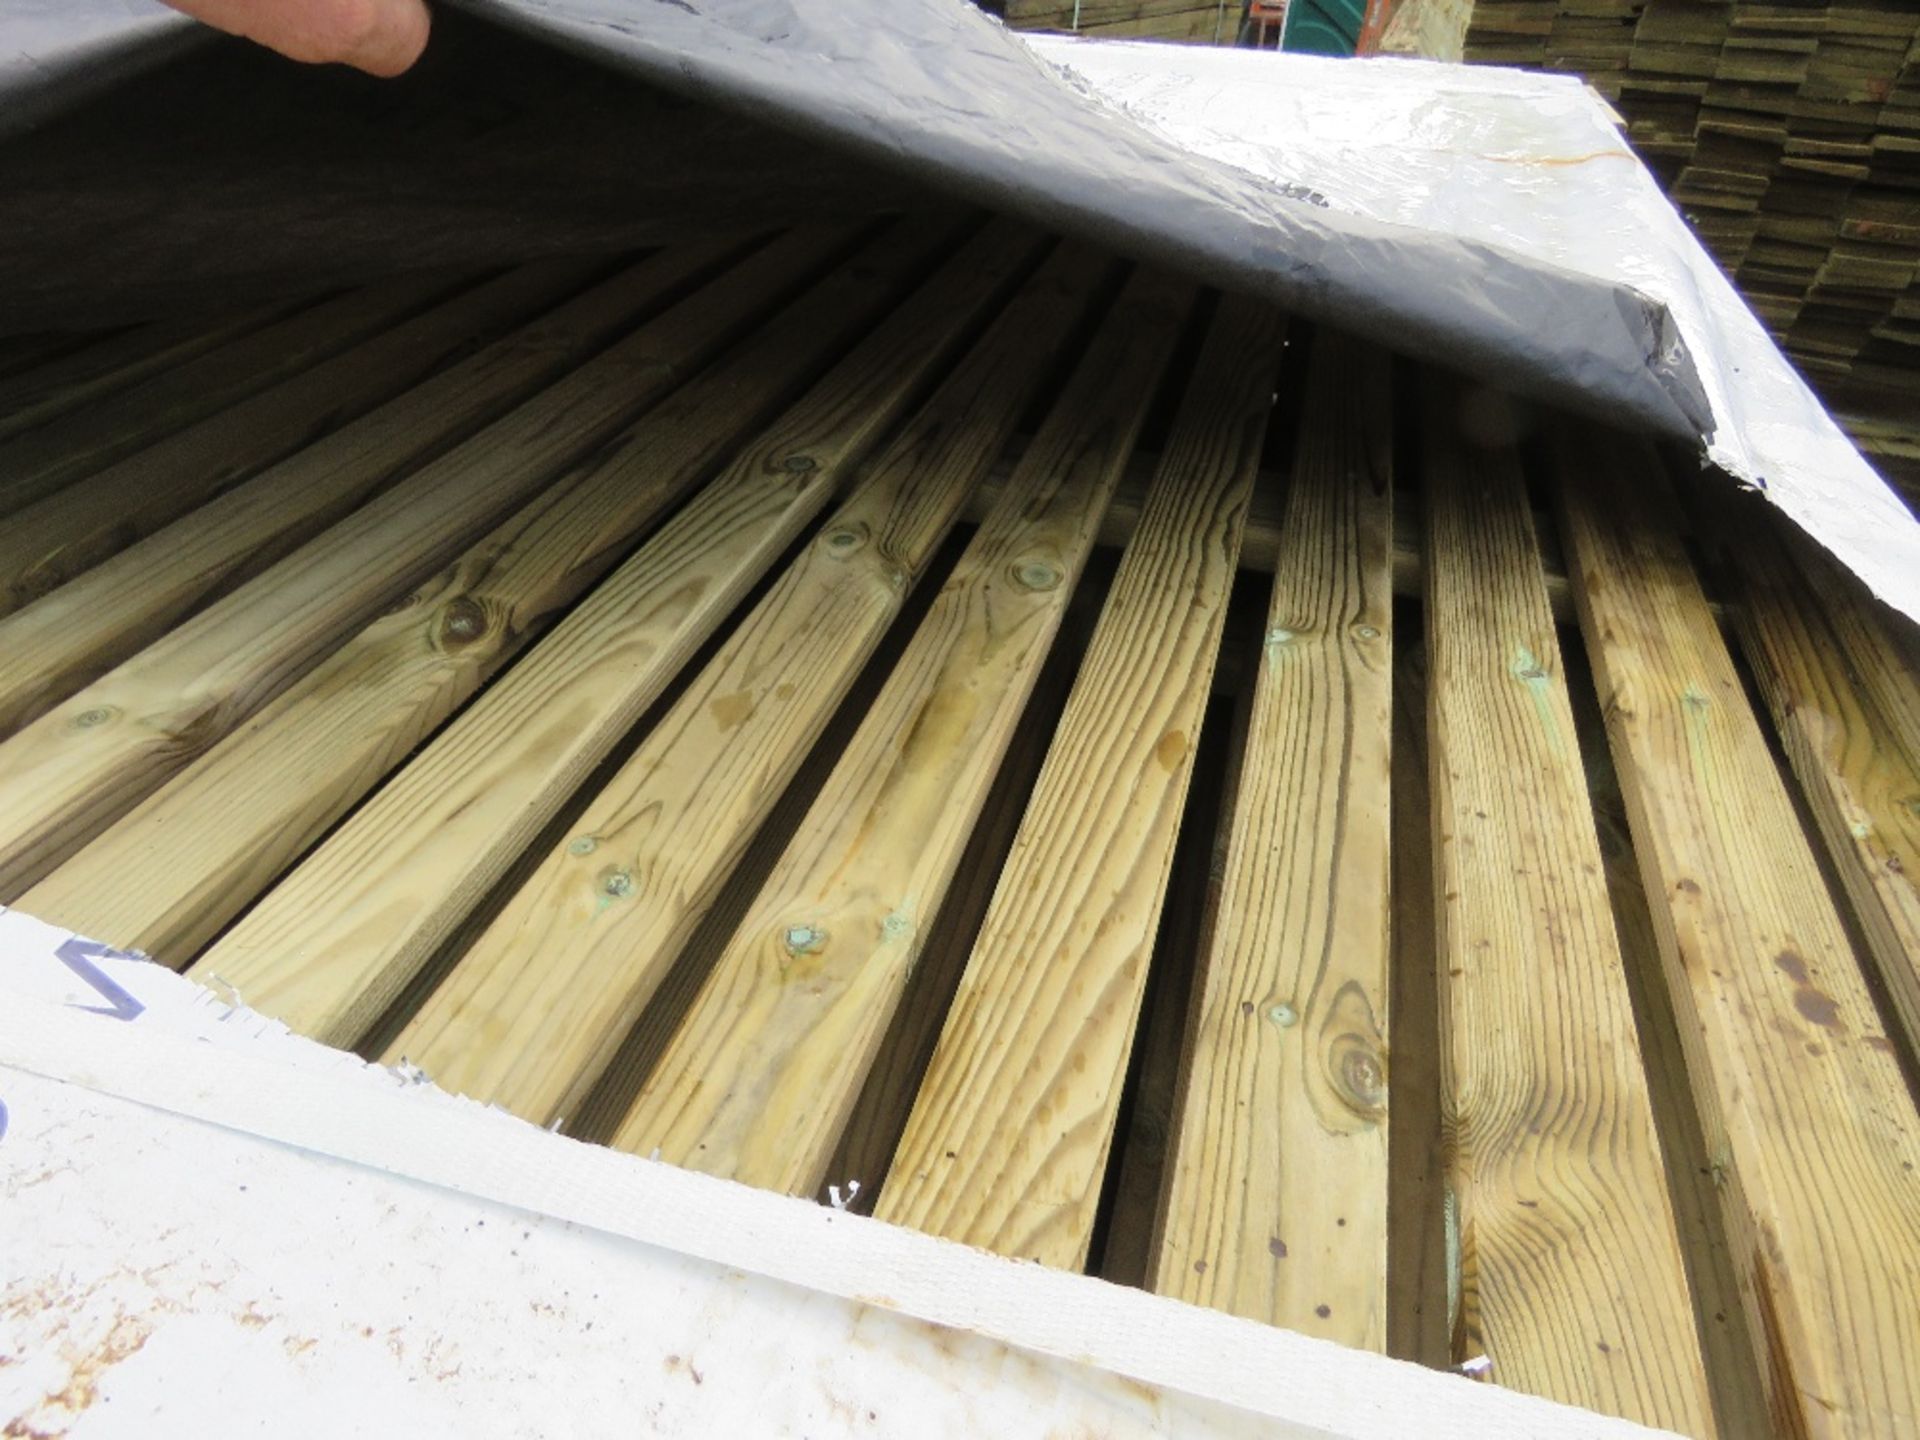 PACK OF VENETIAN SLAT FENCE PANELS 1.83M X 1.22M APPROX. 16NO PANELS IN TOTAL. - Image 3 of 3